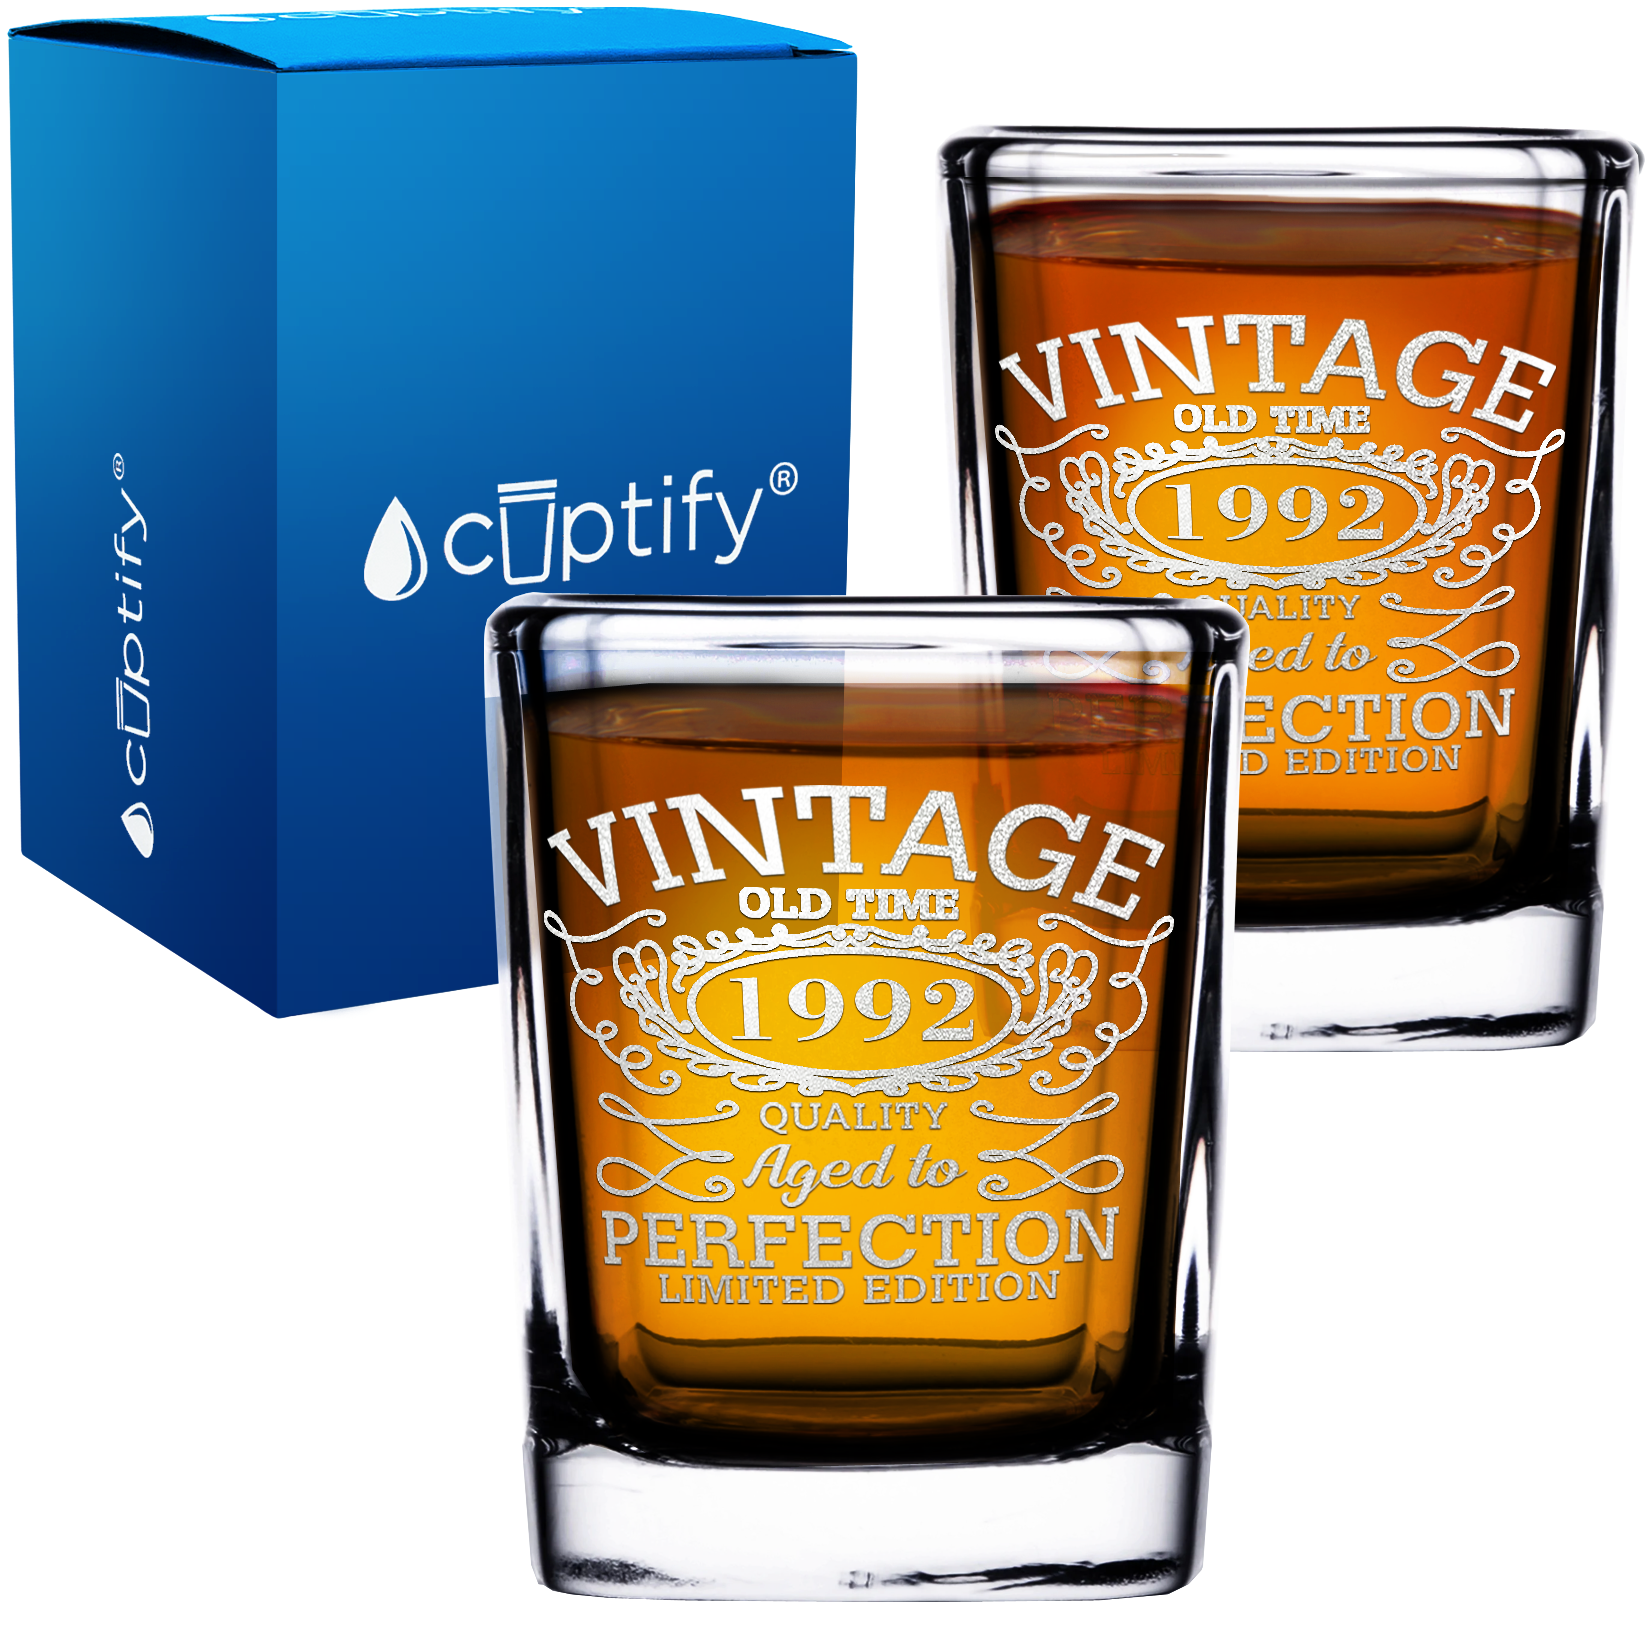 30th Birthday Vintage 30 Years Old Time 1992 Quality 2oz Square Shot Glasses - Set of 2